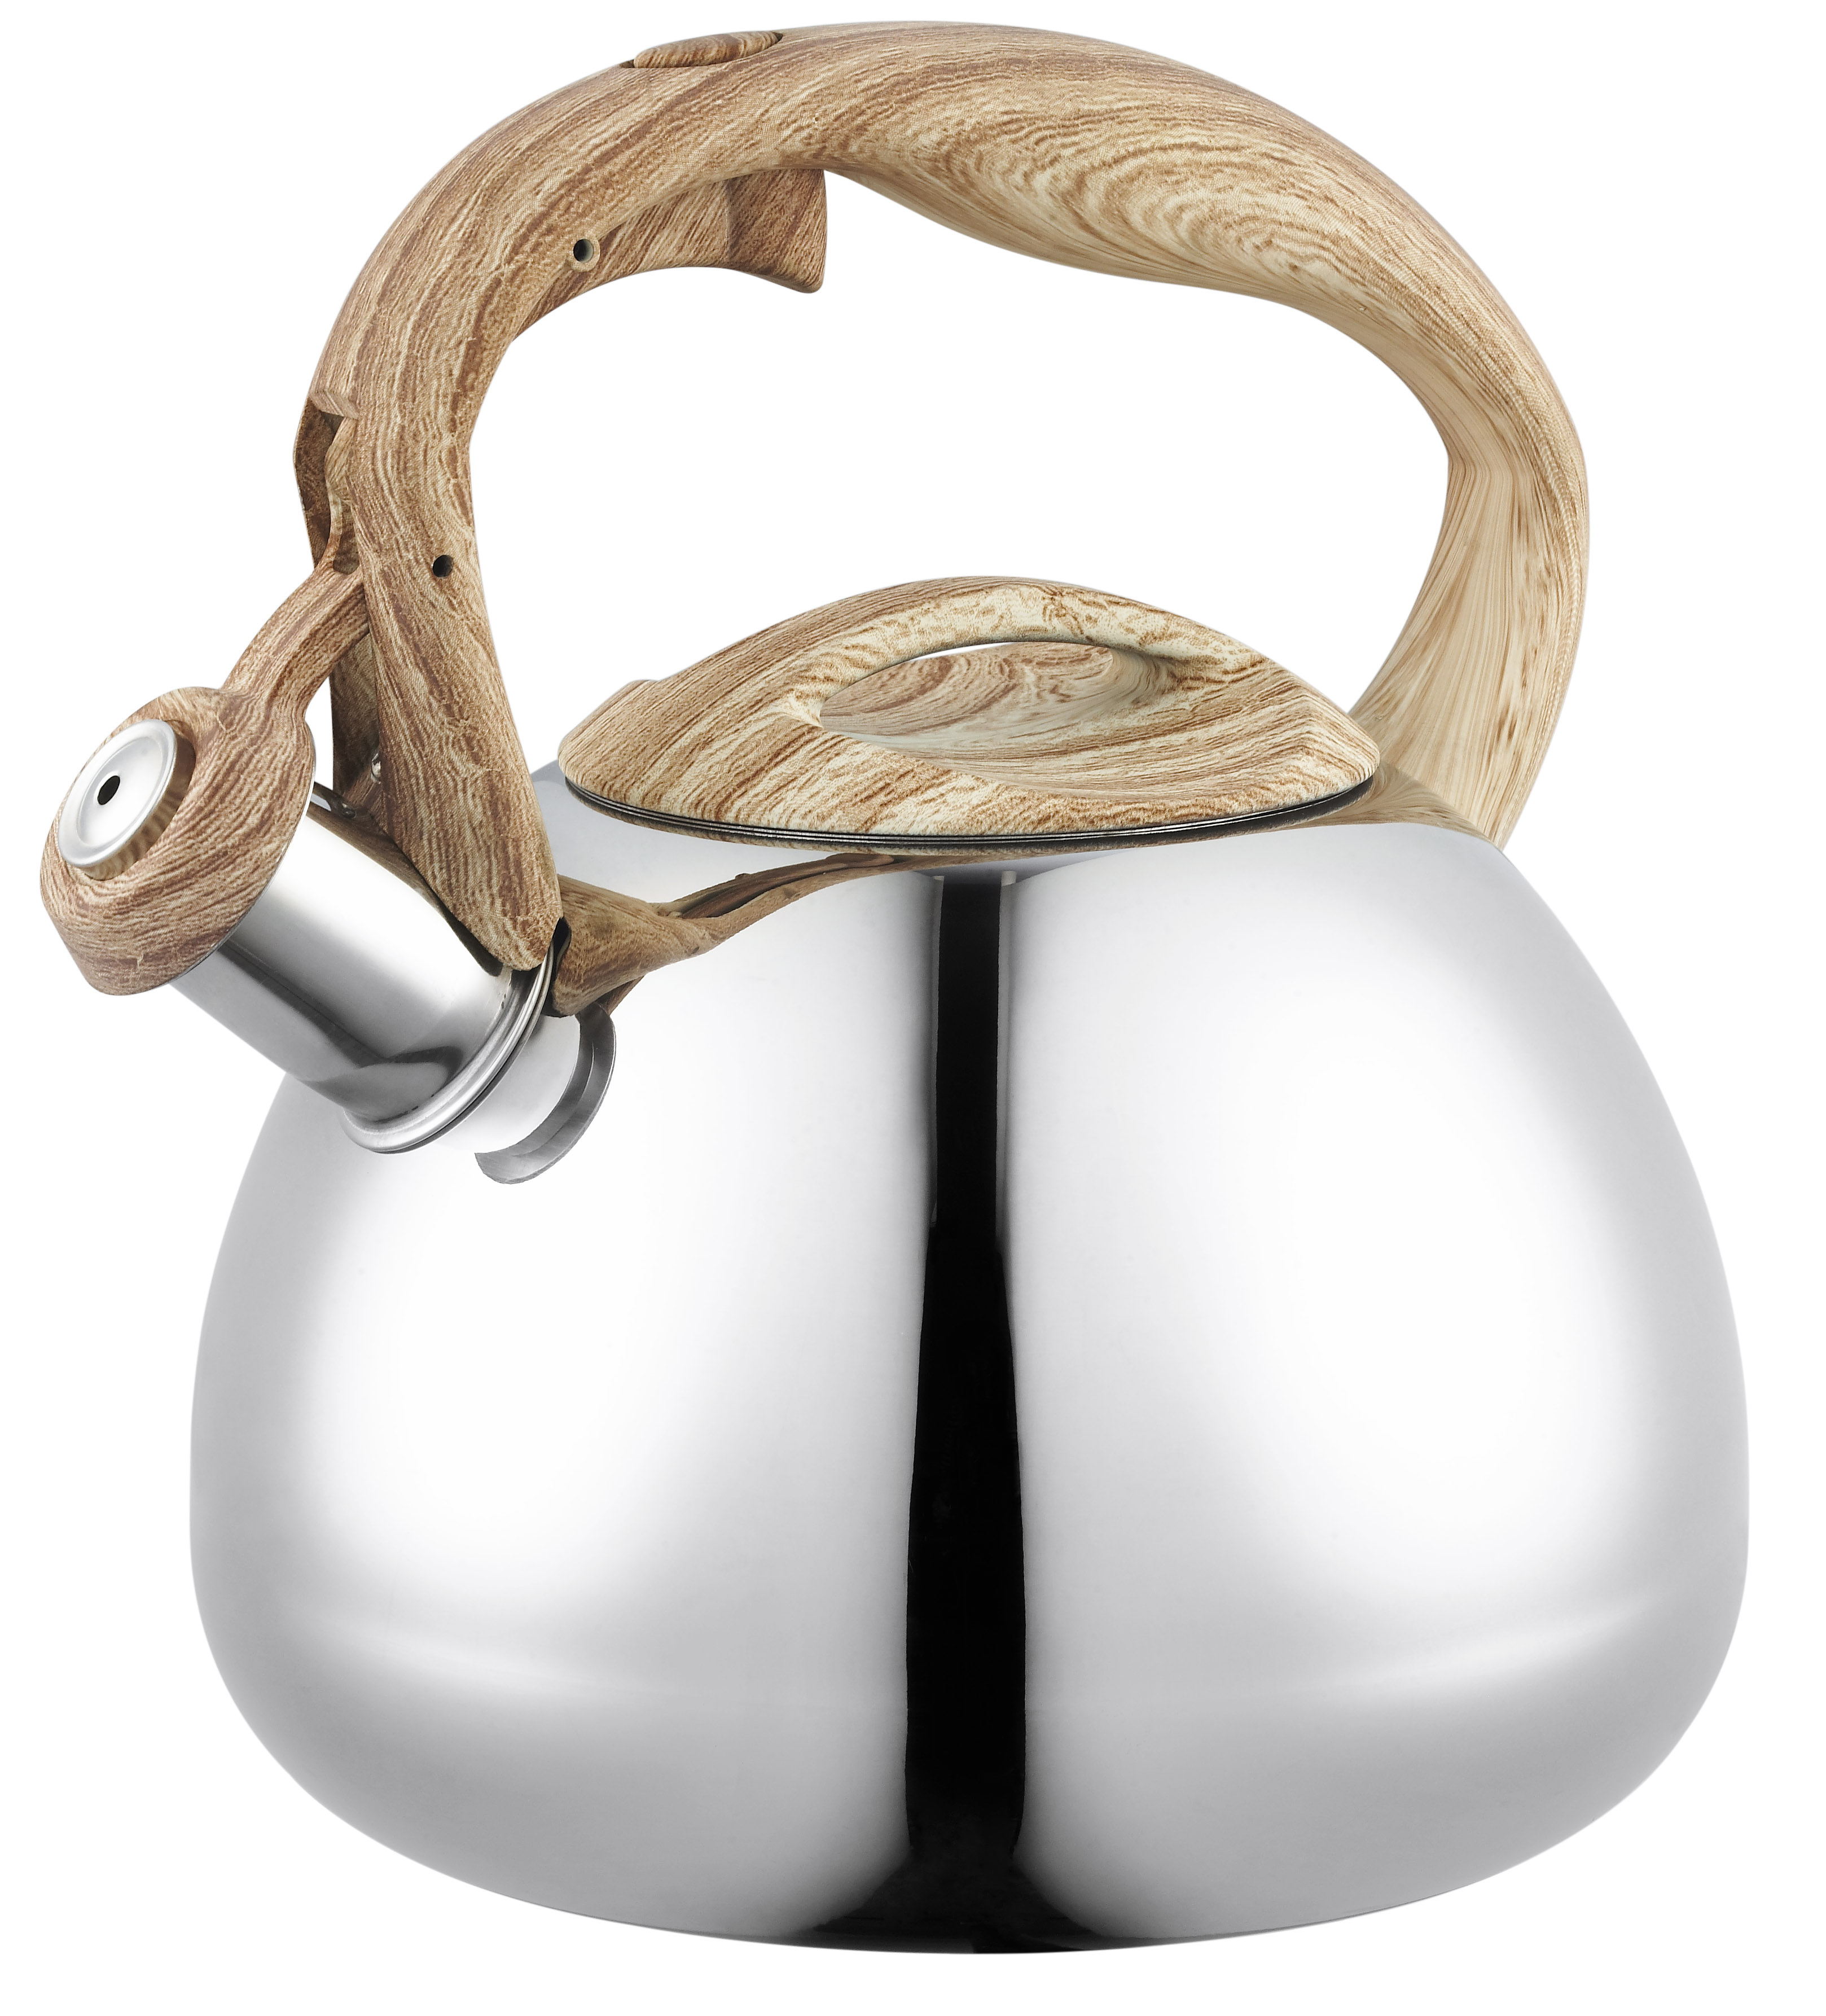 A Comprehensive Guide to Choosing the Perfect Whistling Tea Kettle